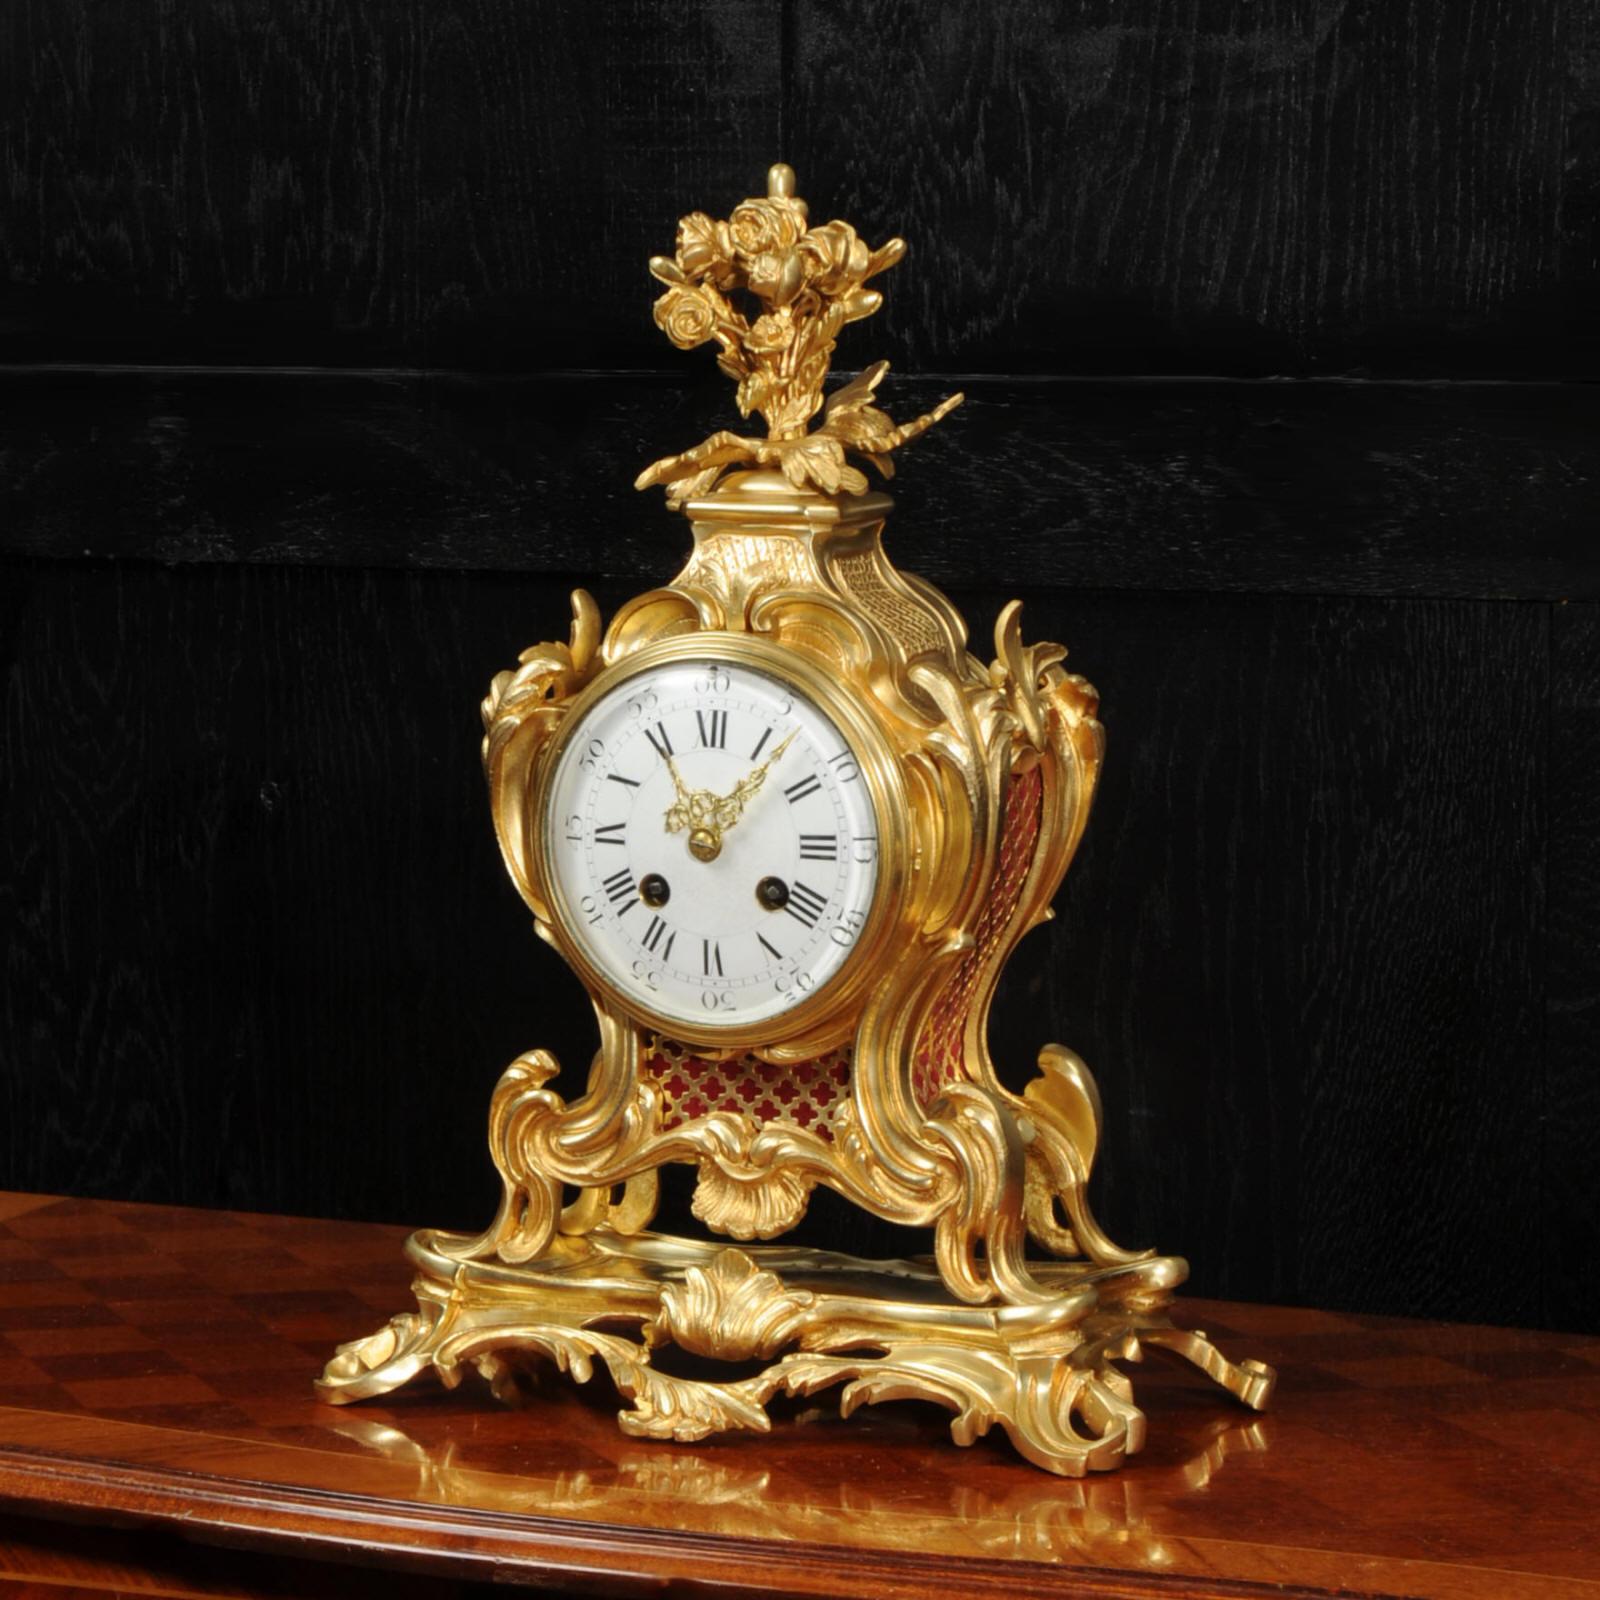 A stunning original antique French Rococo clock. It is beautifully sculptured with finely finished scrolls, curves and acanthus leaves in finely gilded bronze. Panels backed with red fabric lighten the design. The reflection of pendulum can be seen